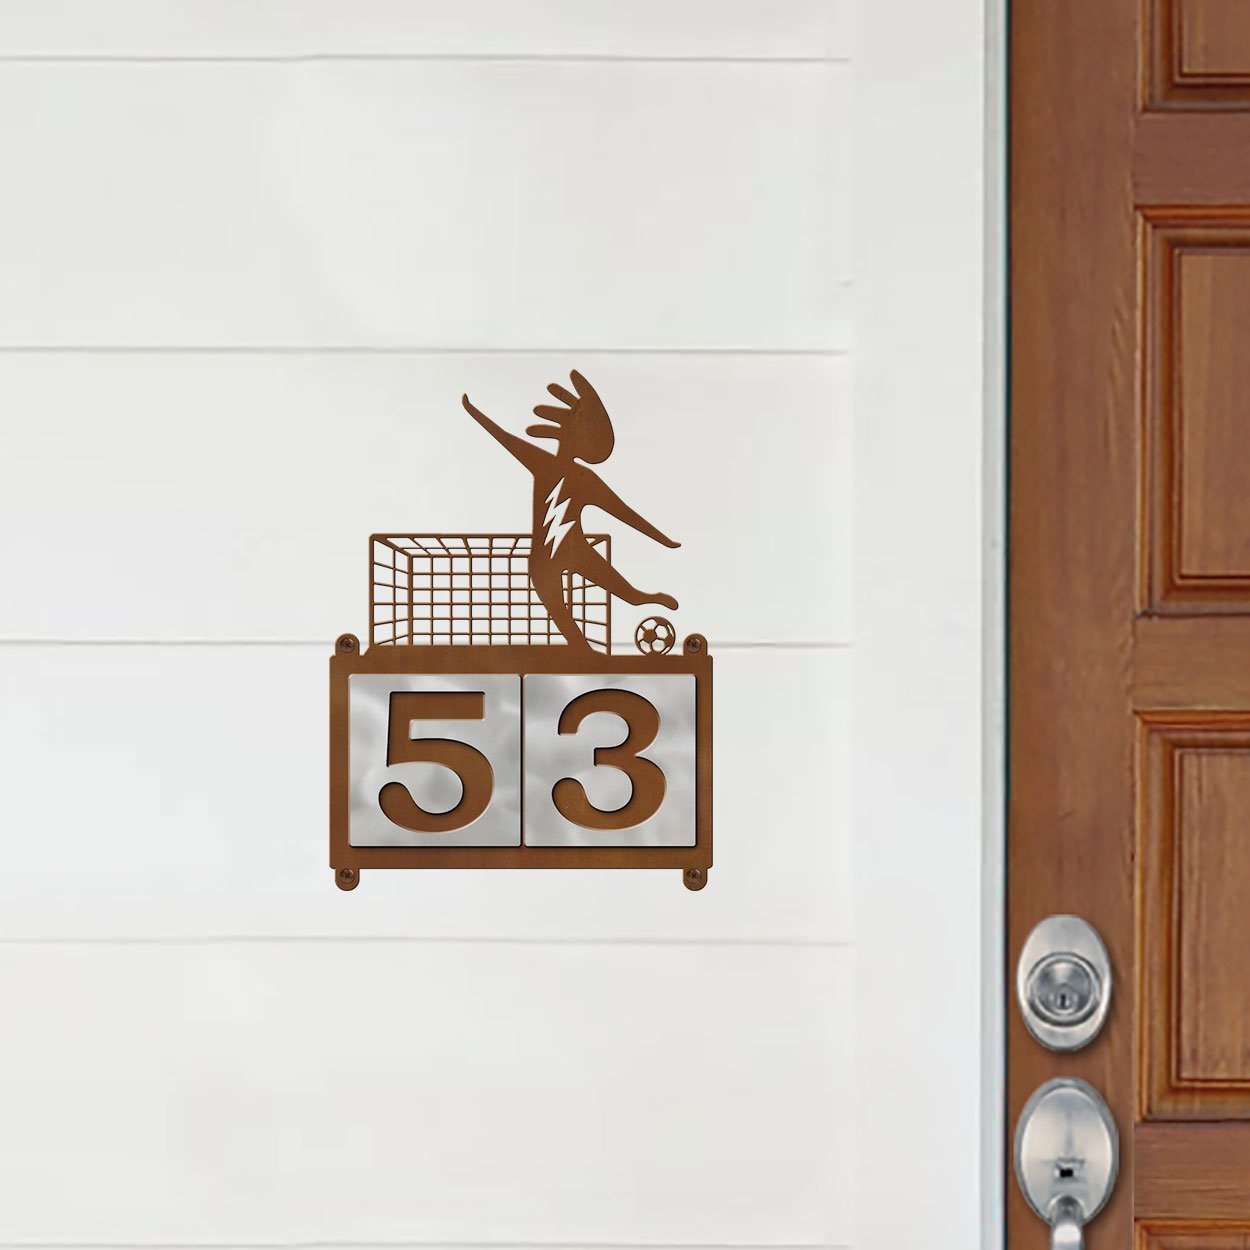 607182 - Kokopelli Lone Soccer Player Design 2-Digit Horizontal 4-inch Tile Outdoor House Numbers